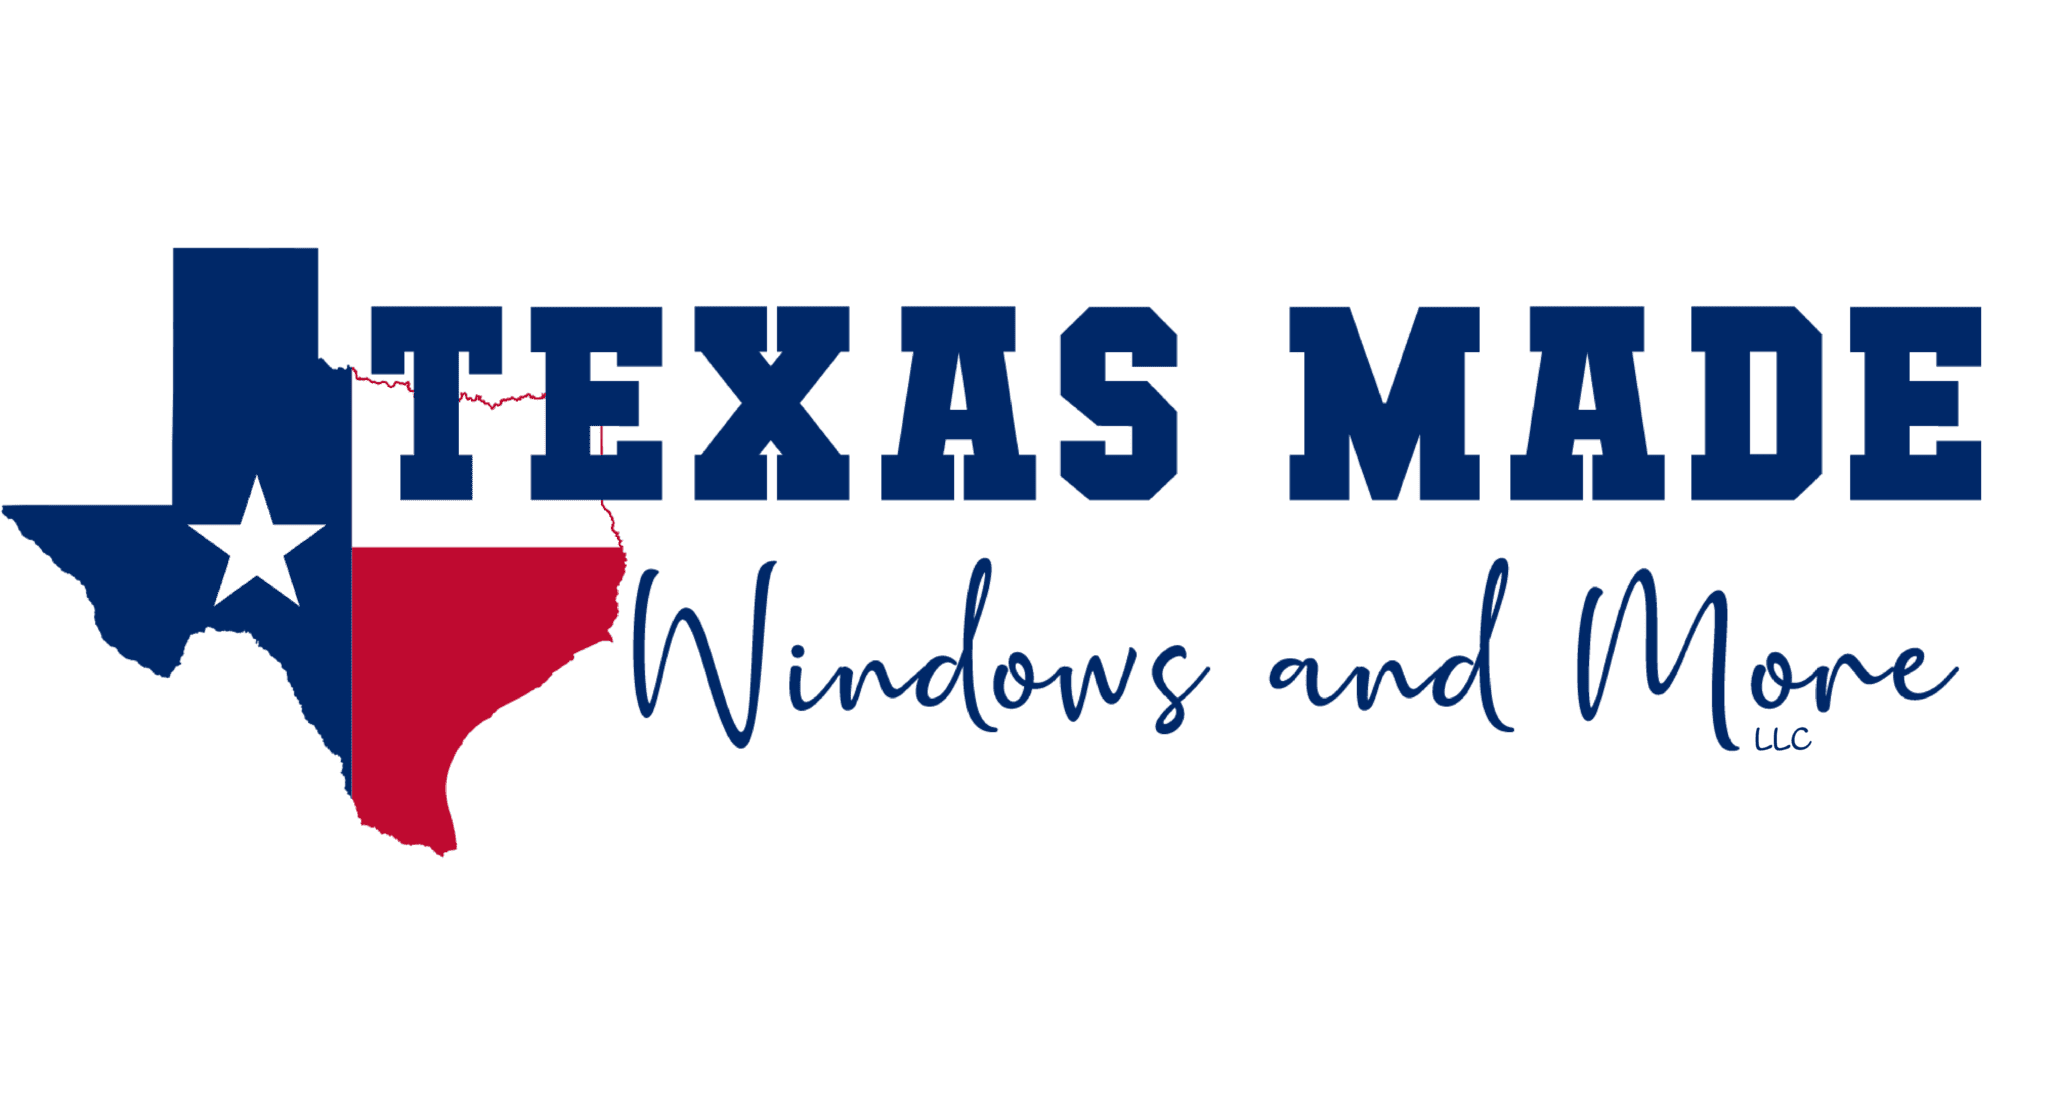 Texas Made Windows and More